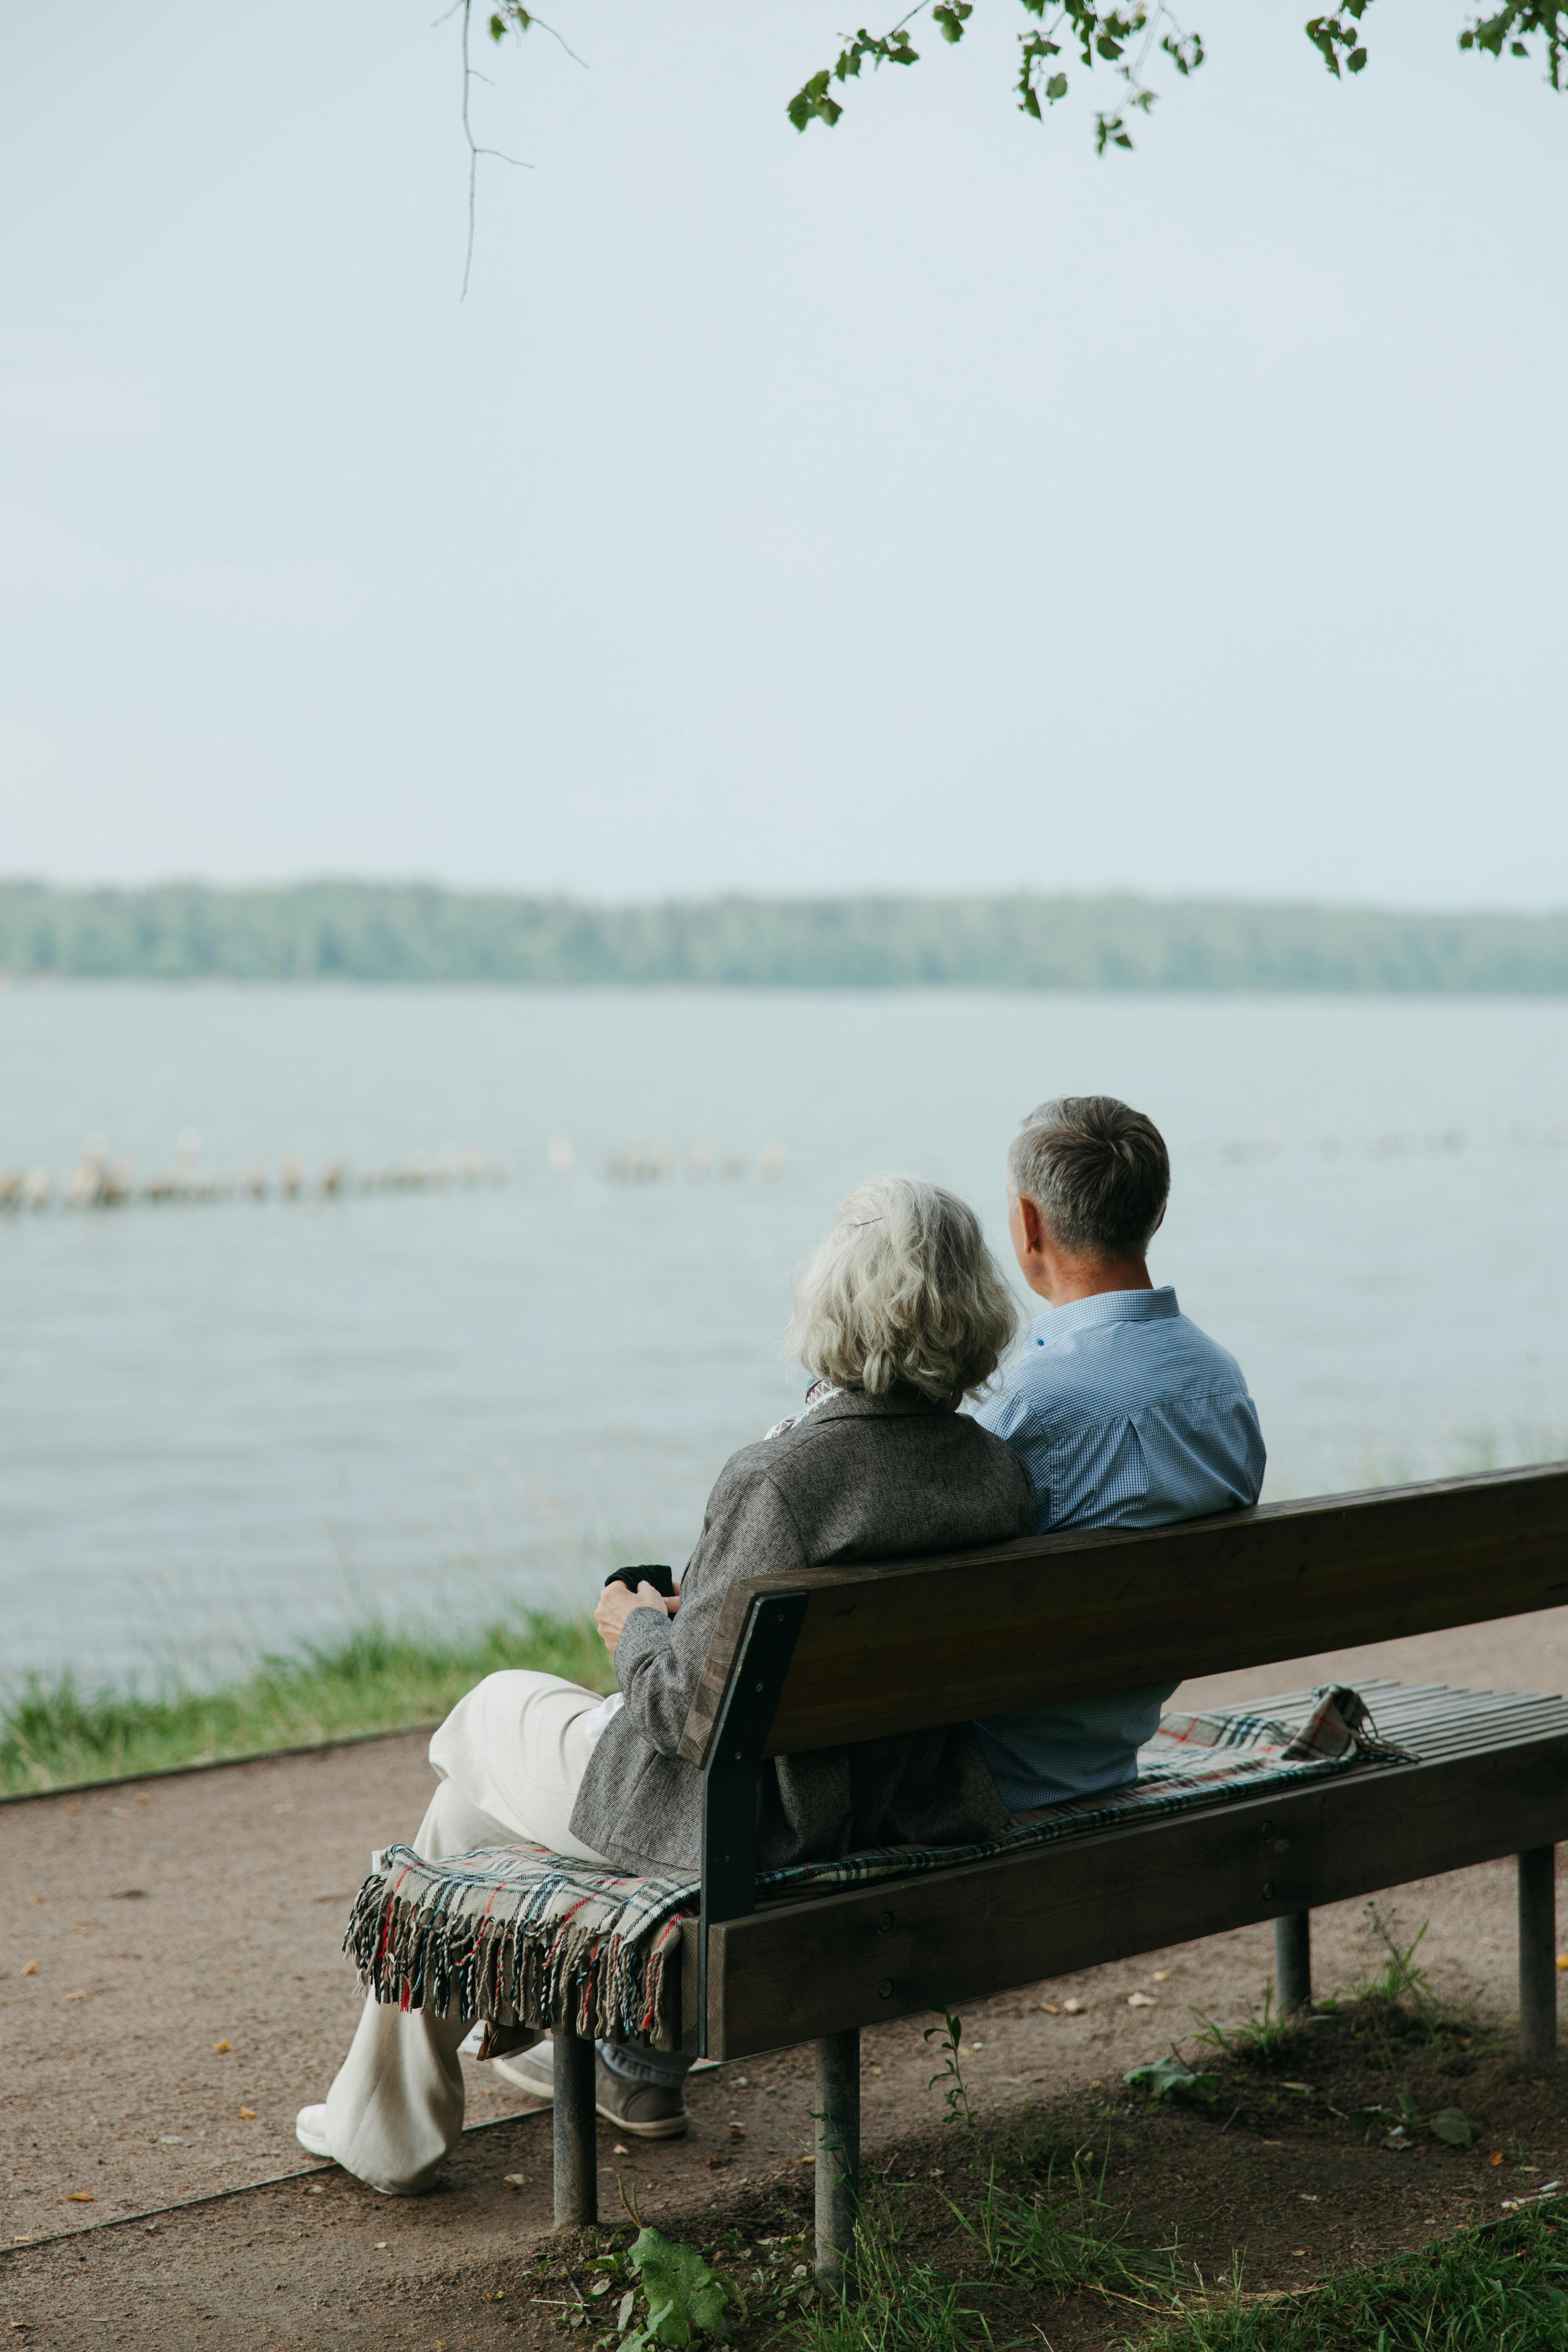 An elderly couple sitting on a bench by the lake | Source: Pexels